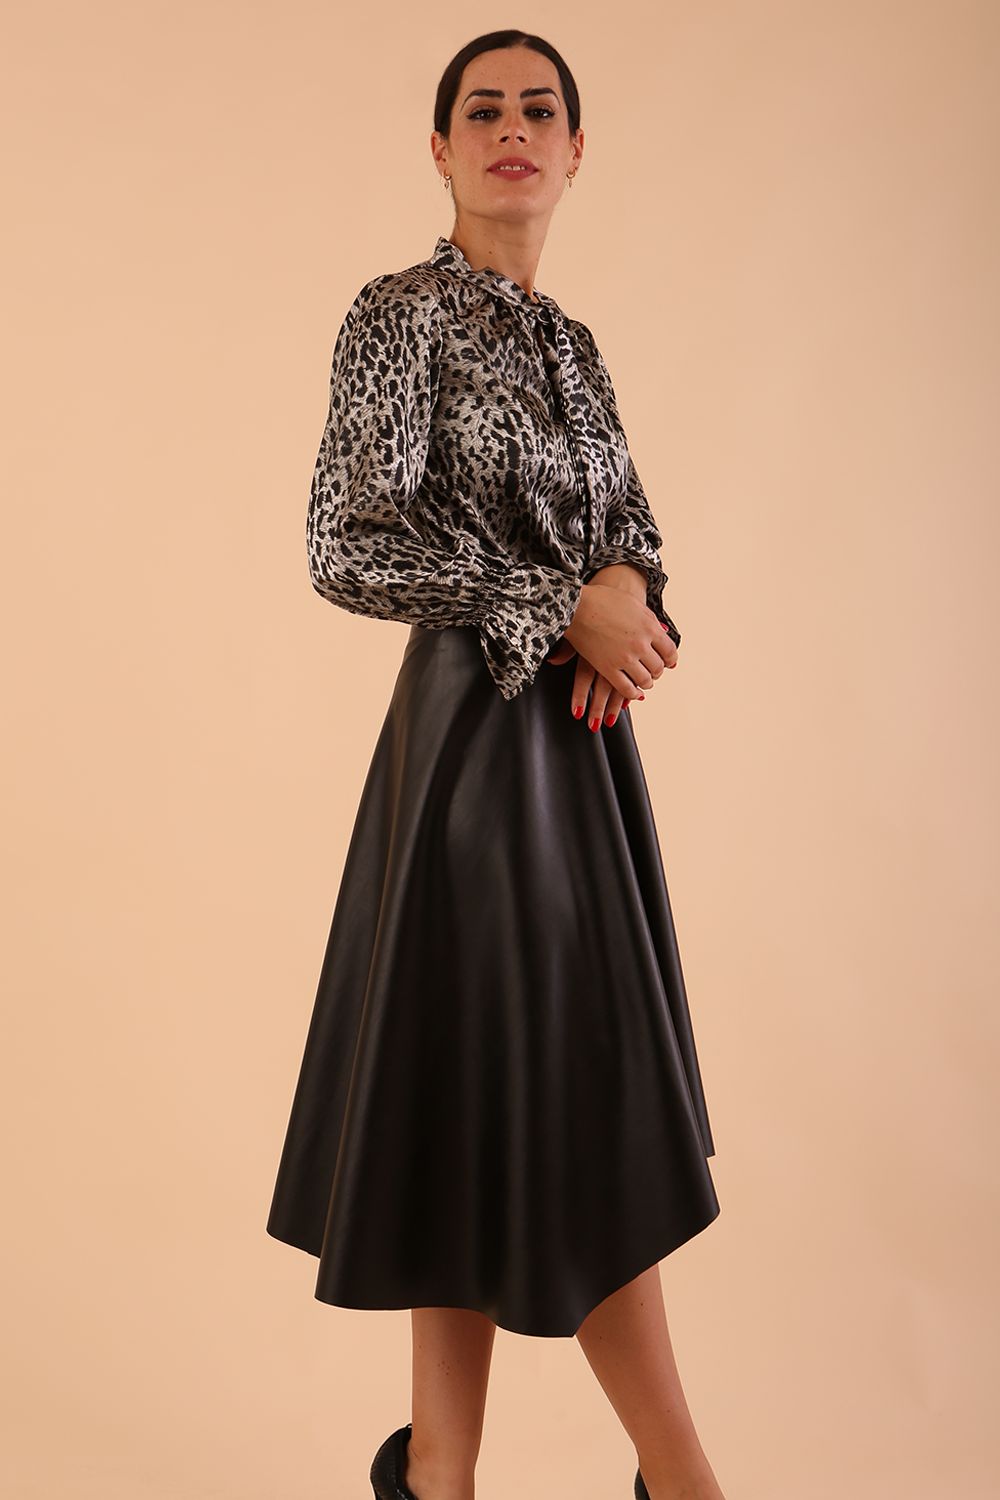 divacatwalk ricky long sleeve animal printed top with a loose tie detail at the front in silver leopard print 